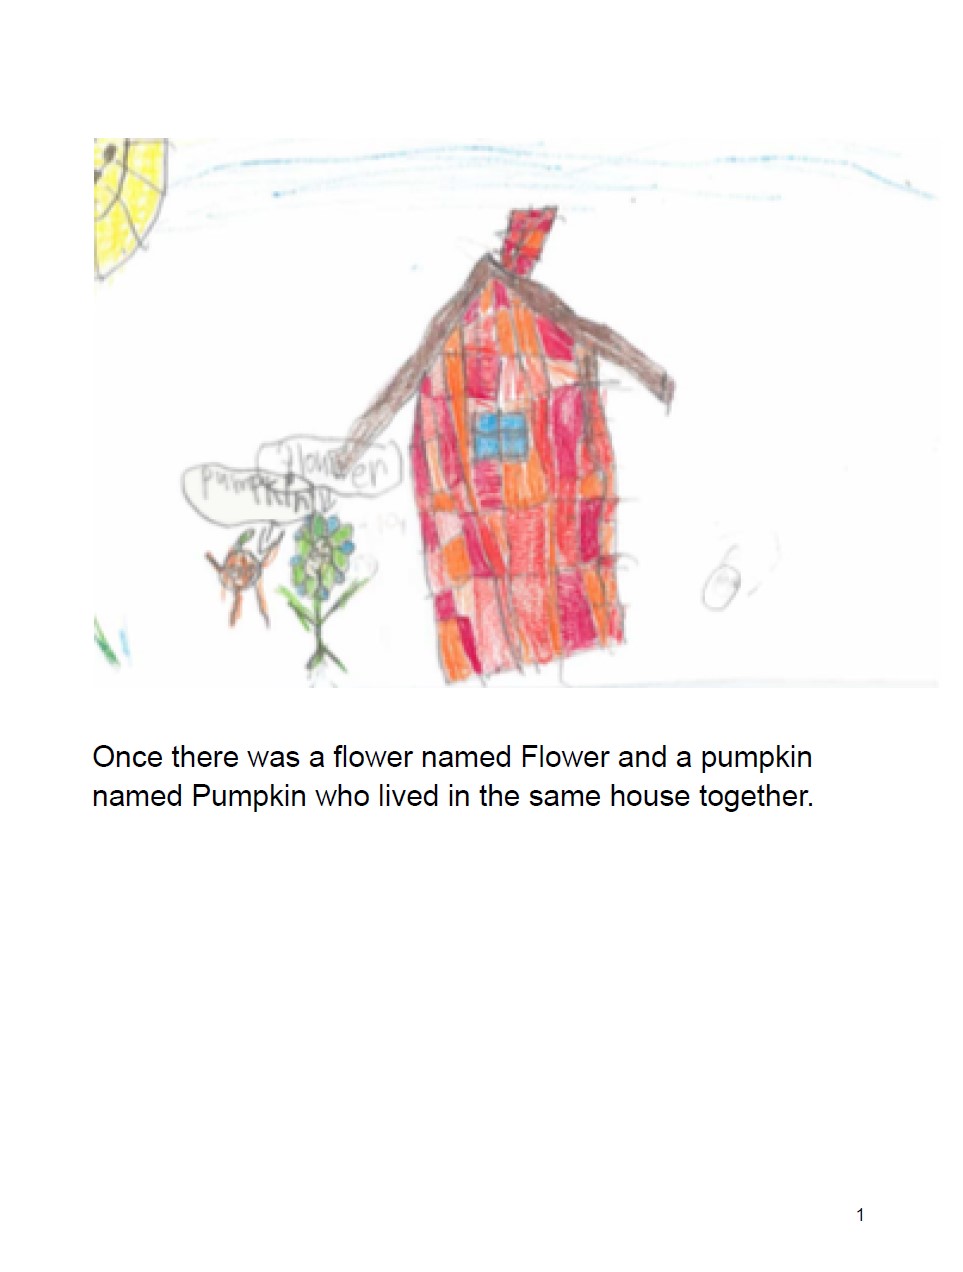 The Story of Pumpkin and Flower by Ethan T.